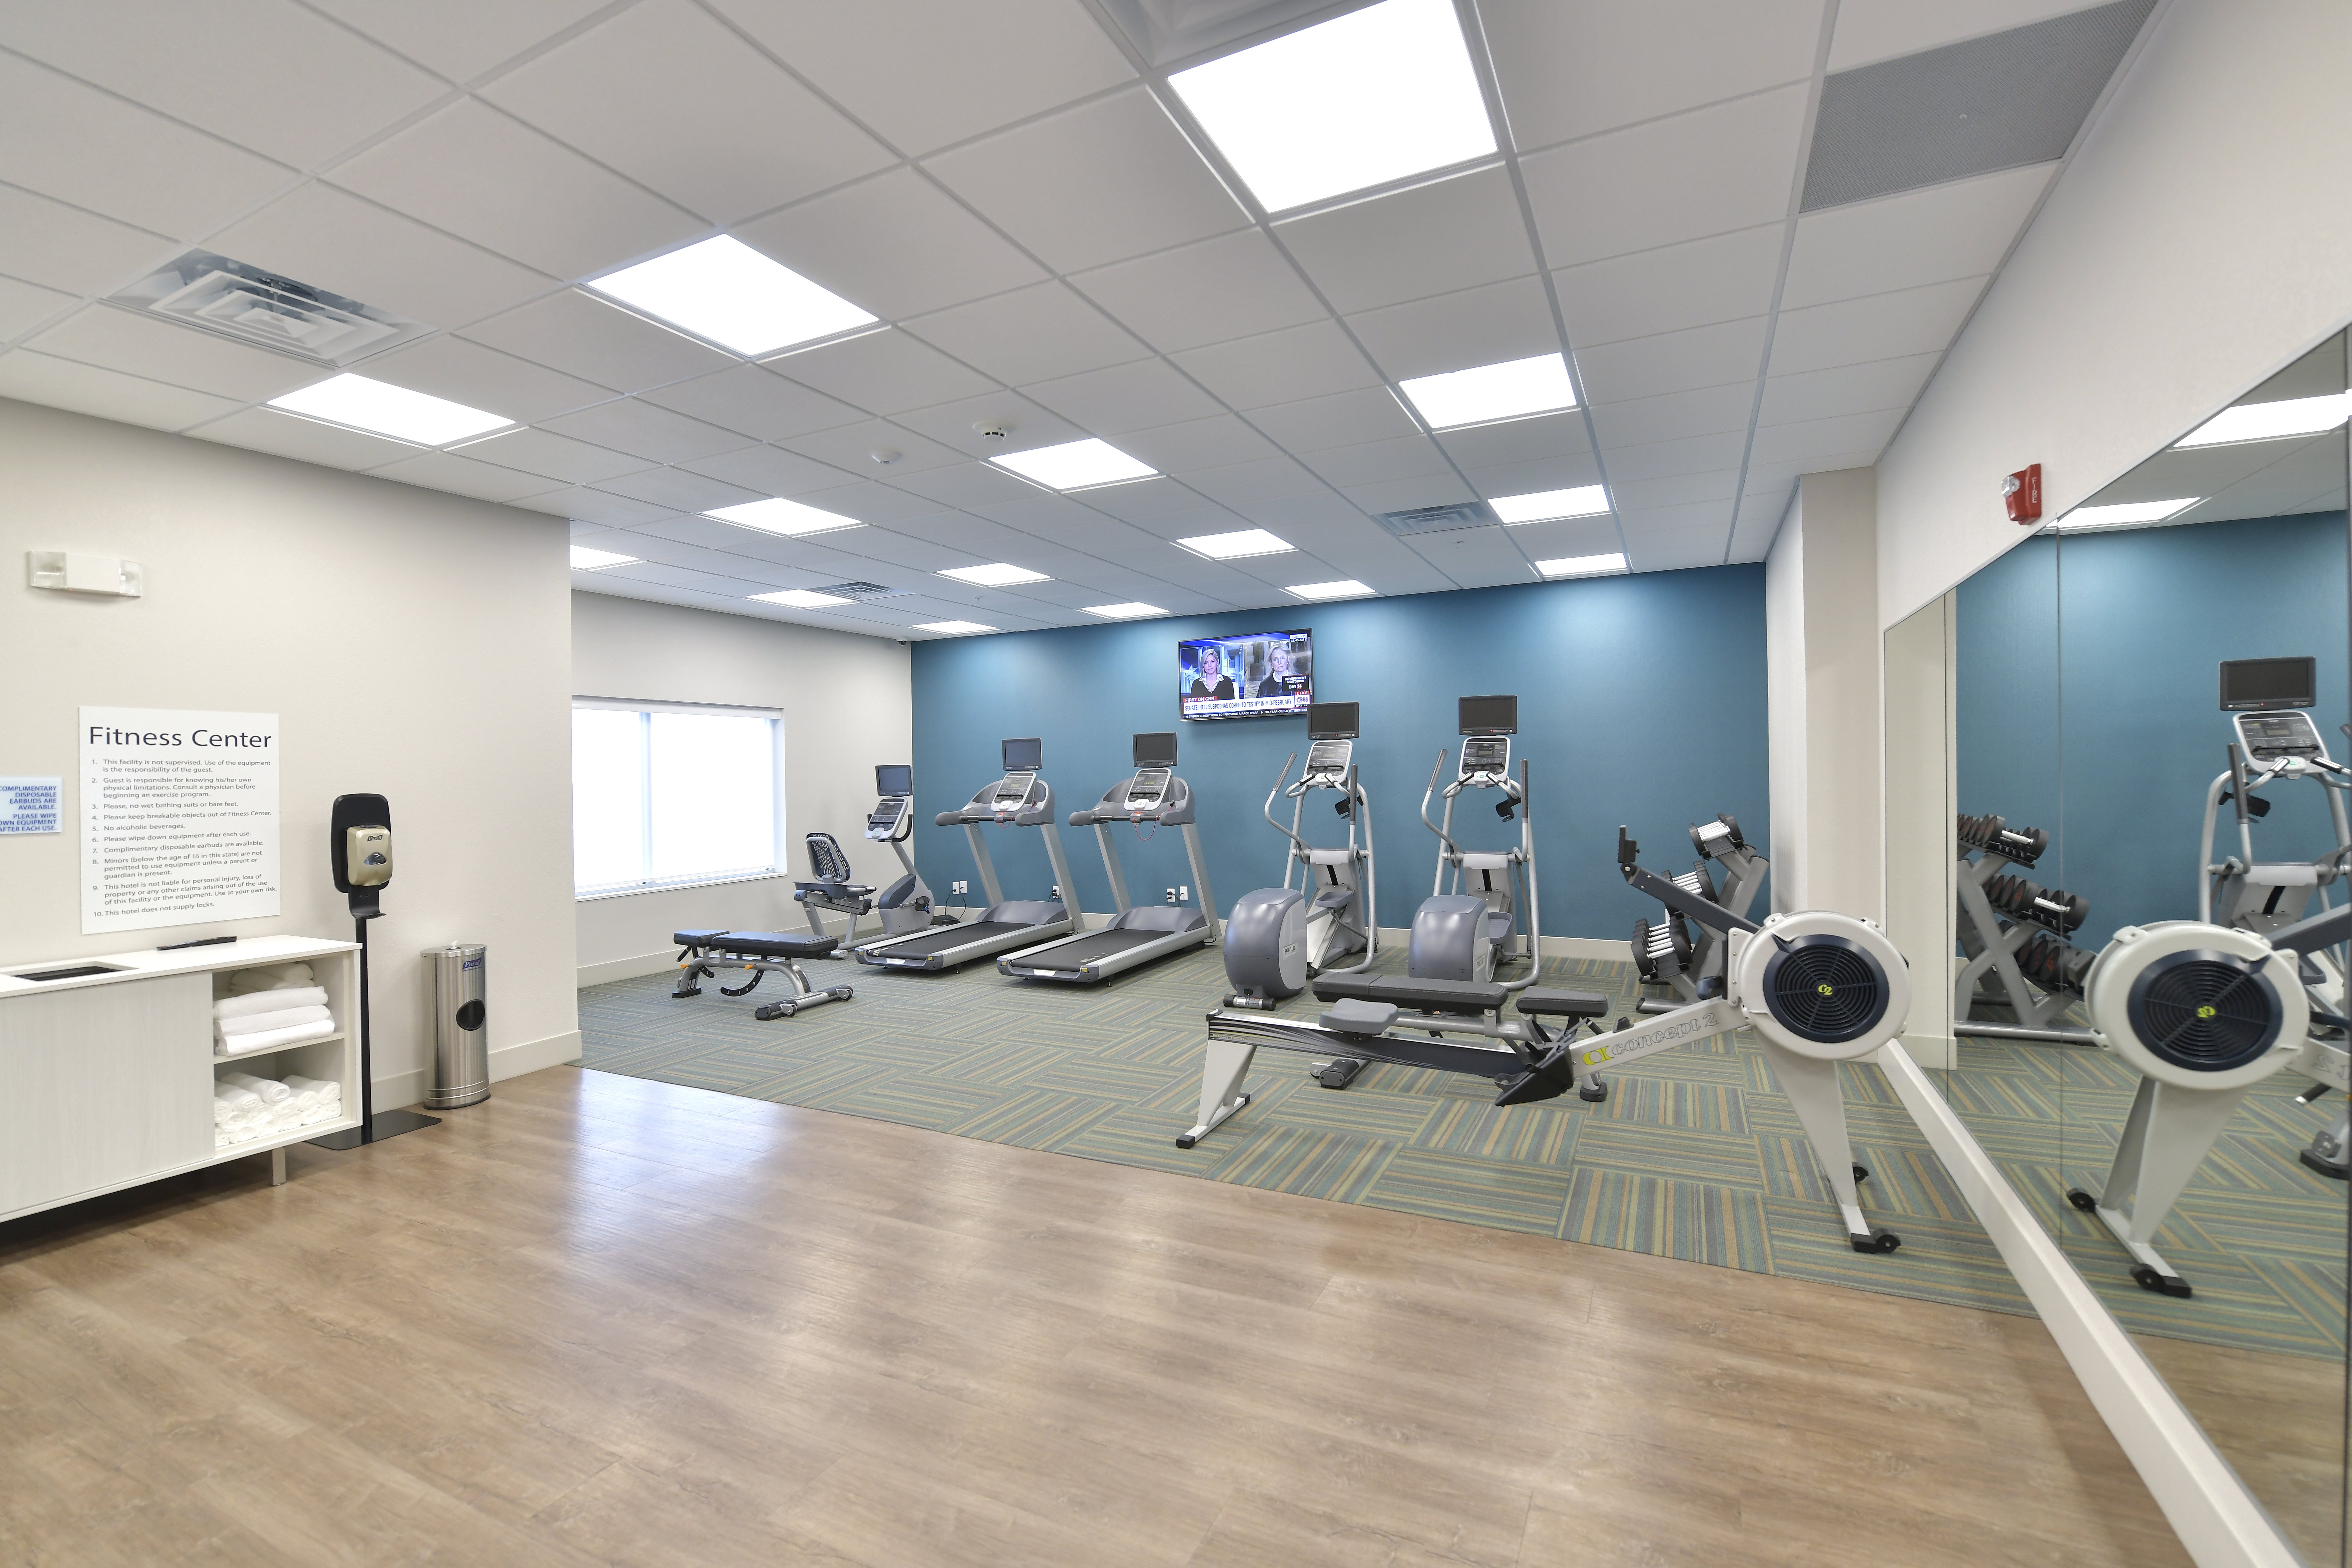 Modern Fitness Room with Exensive Options